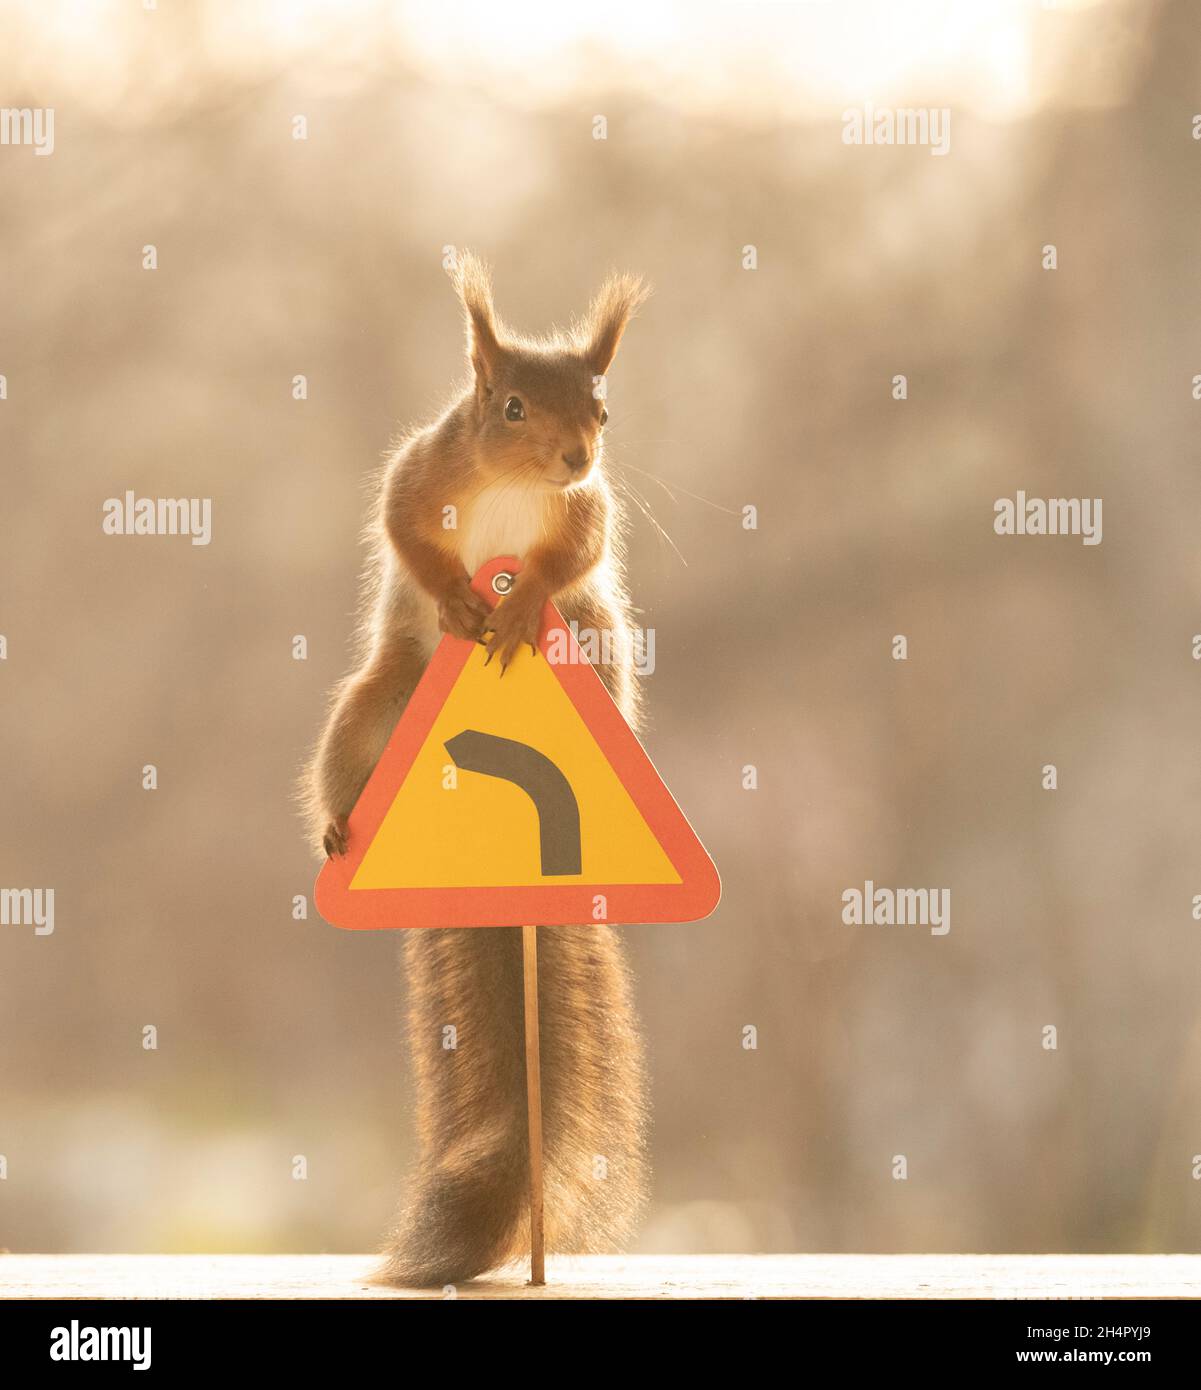 red squirrel is holding a oneway sign Stock Photo